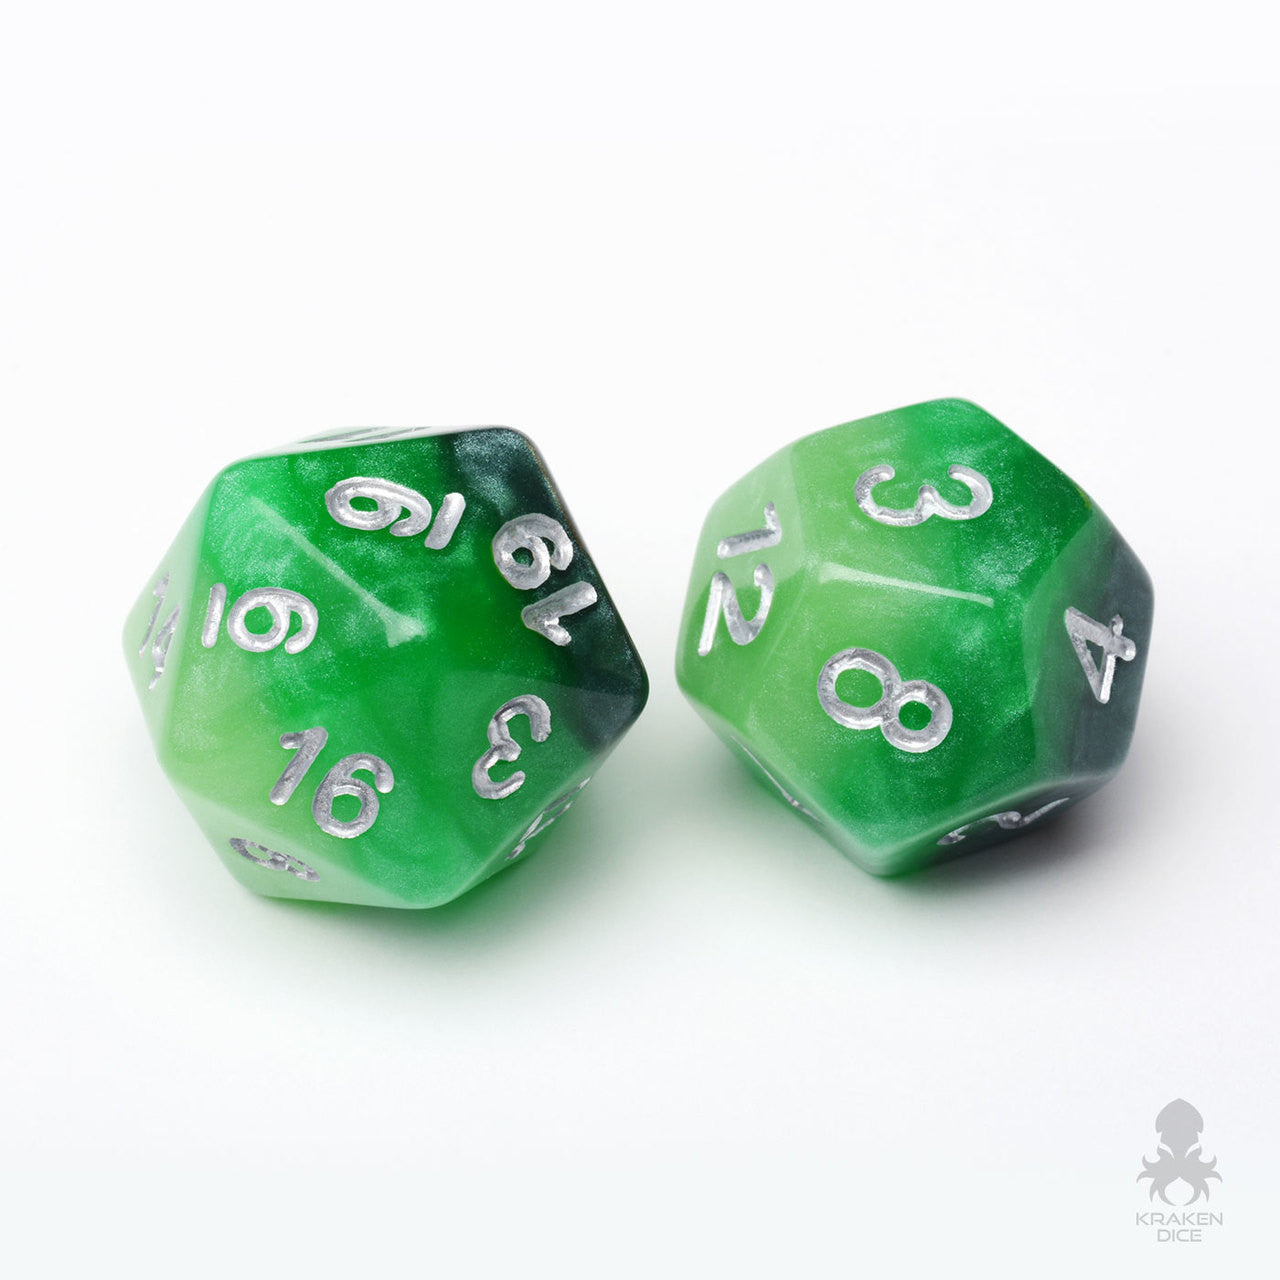 Green Ombre 7 Piece Layered RPG Dice Set